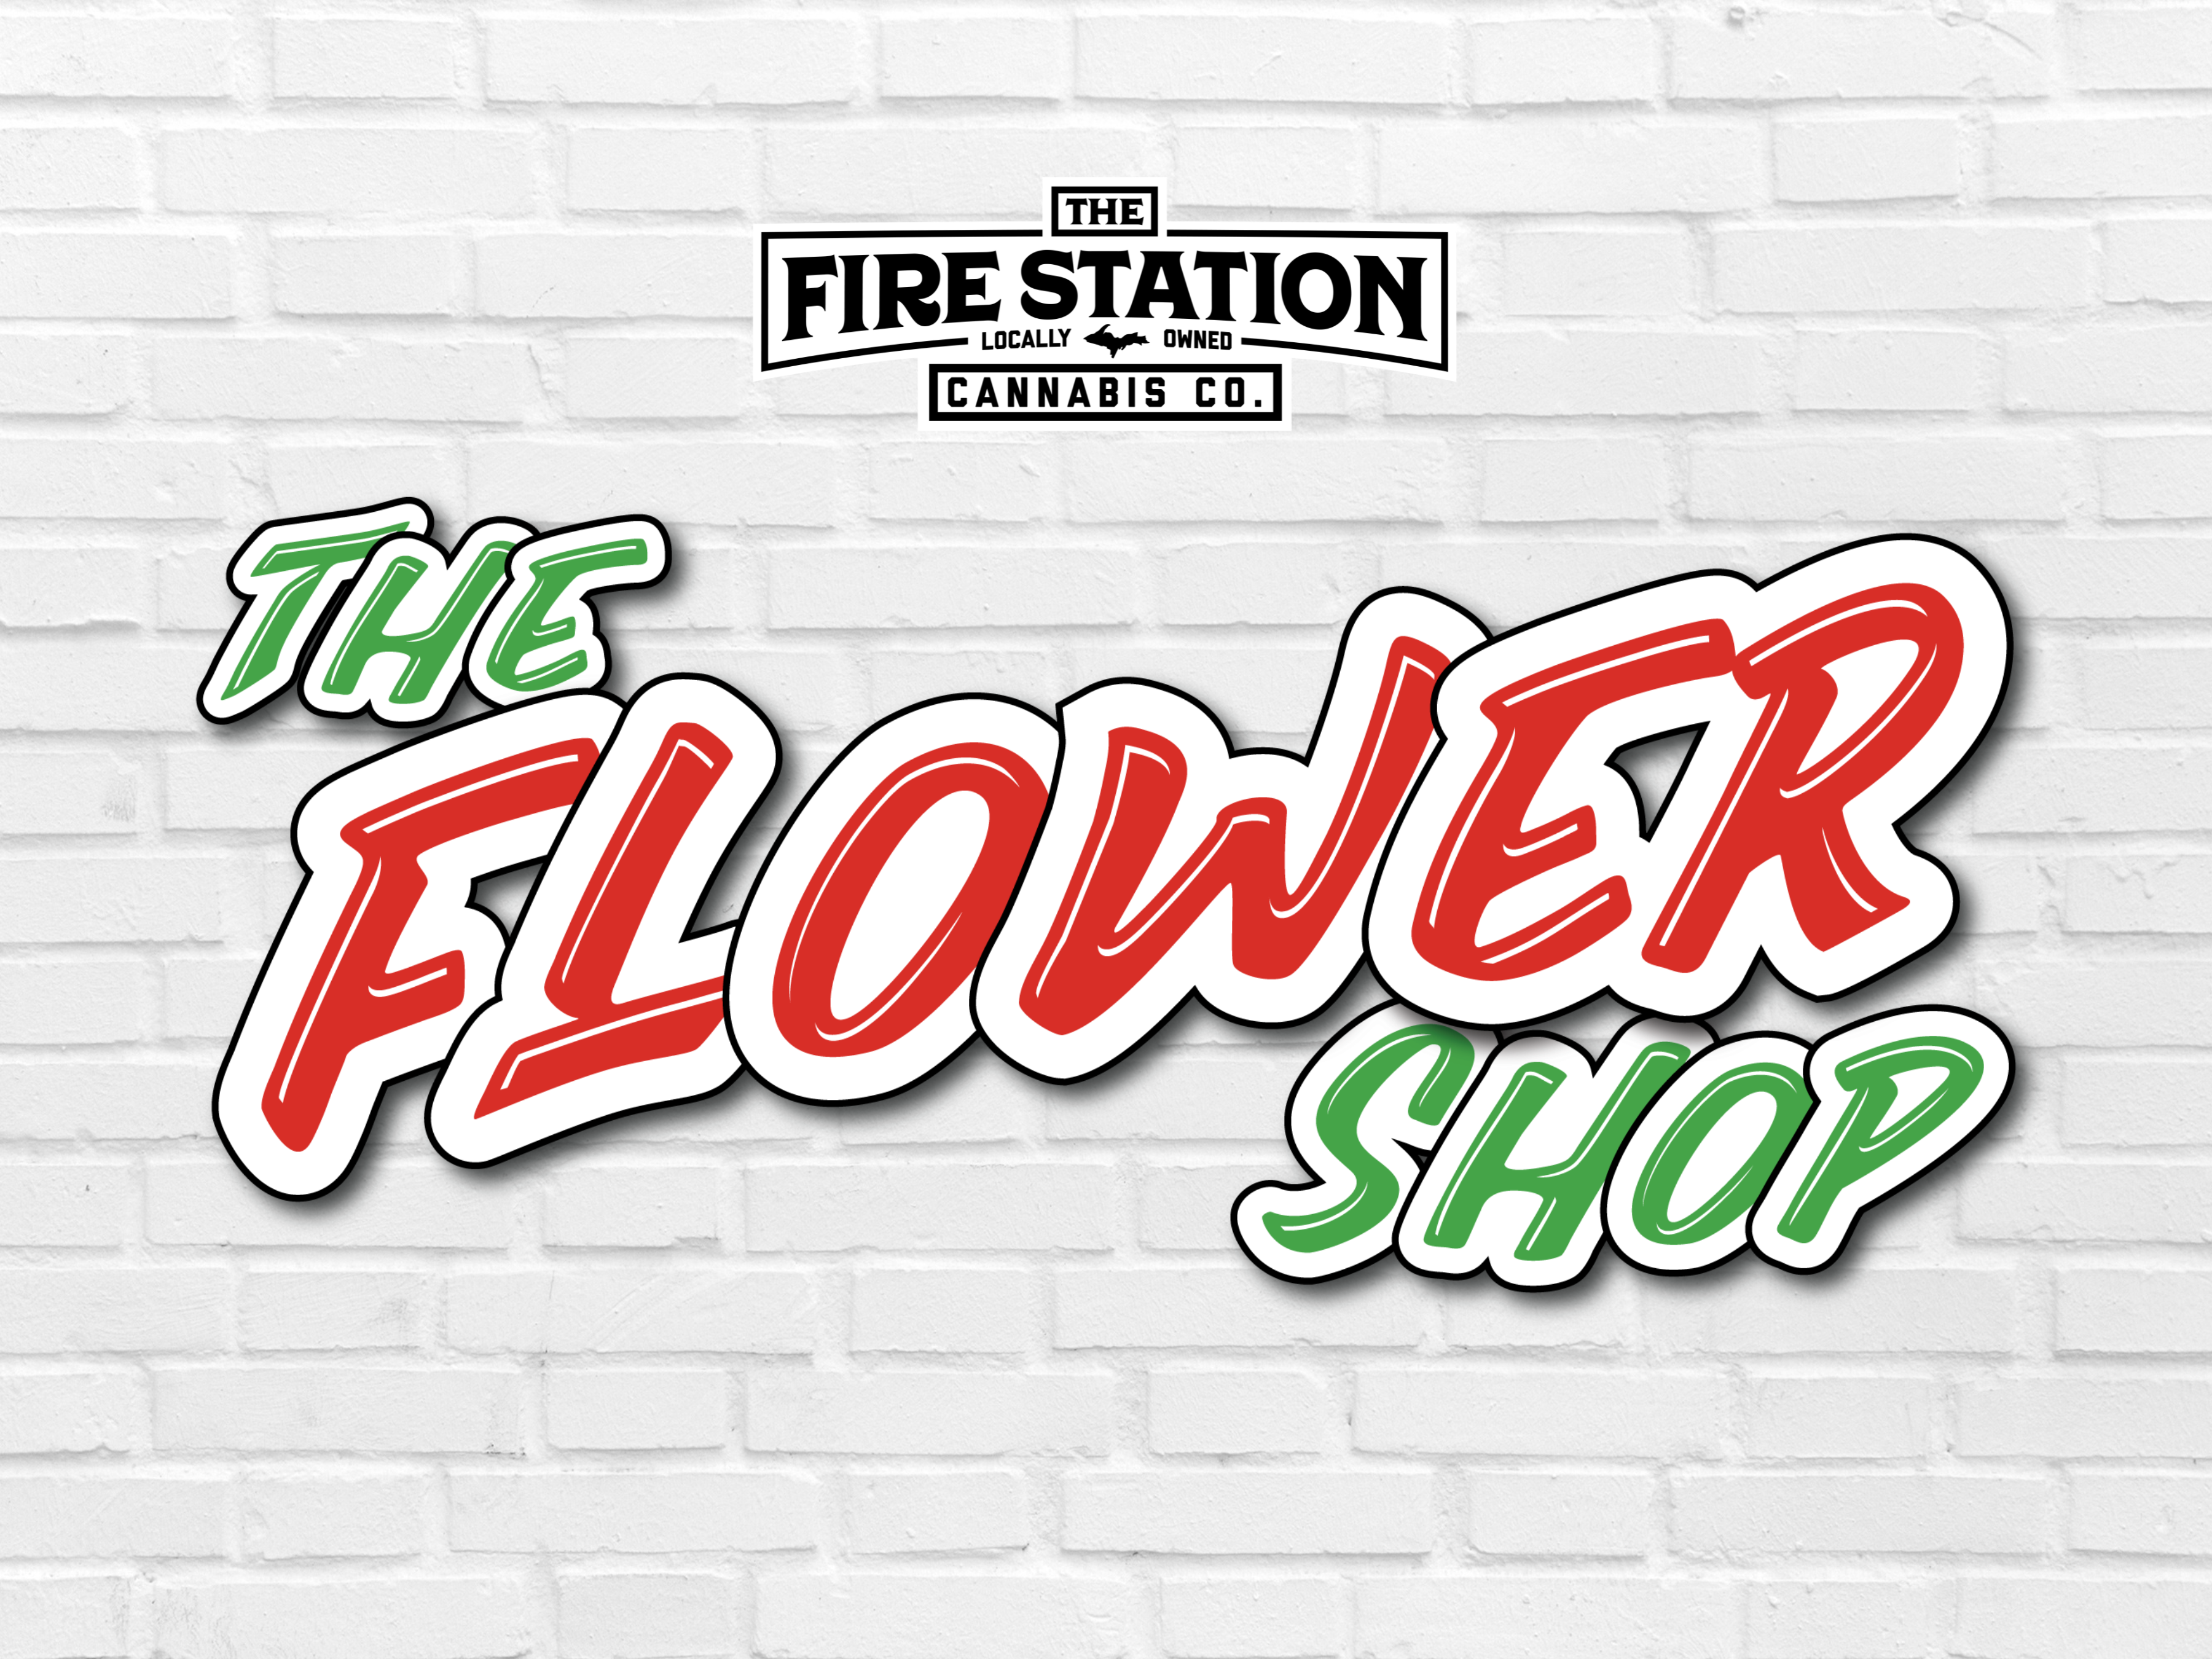 The Fire Station's Flower Shop